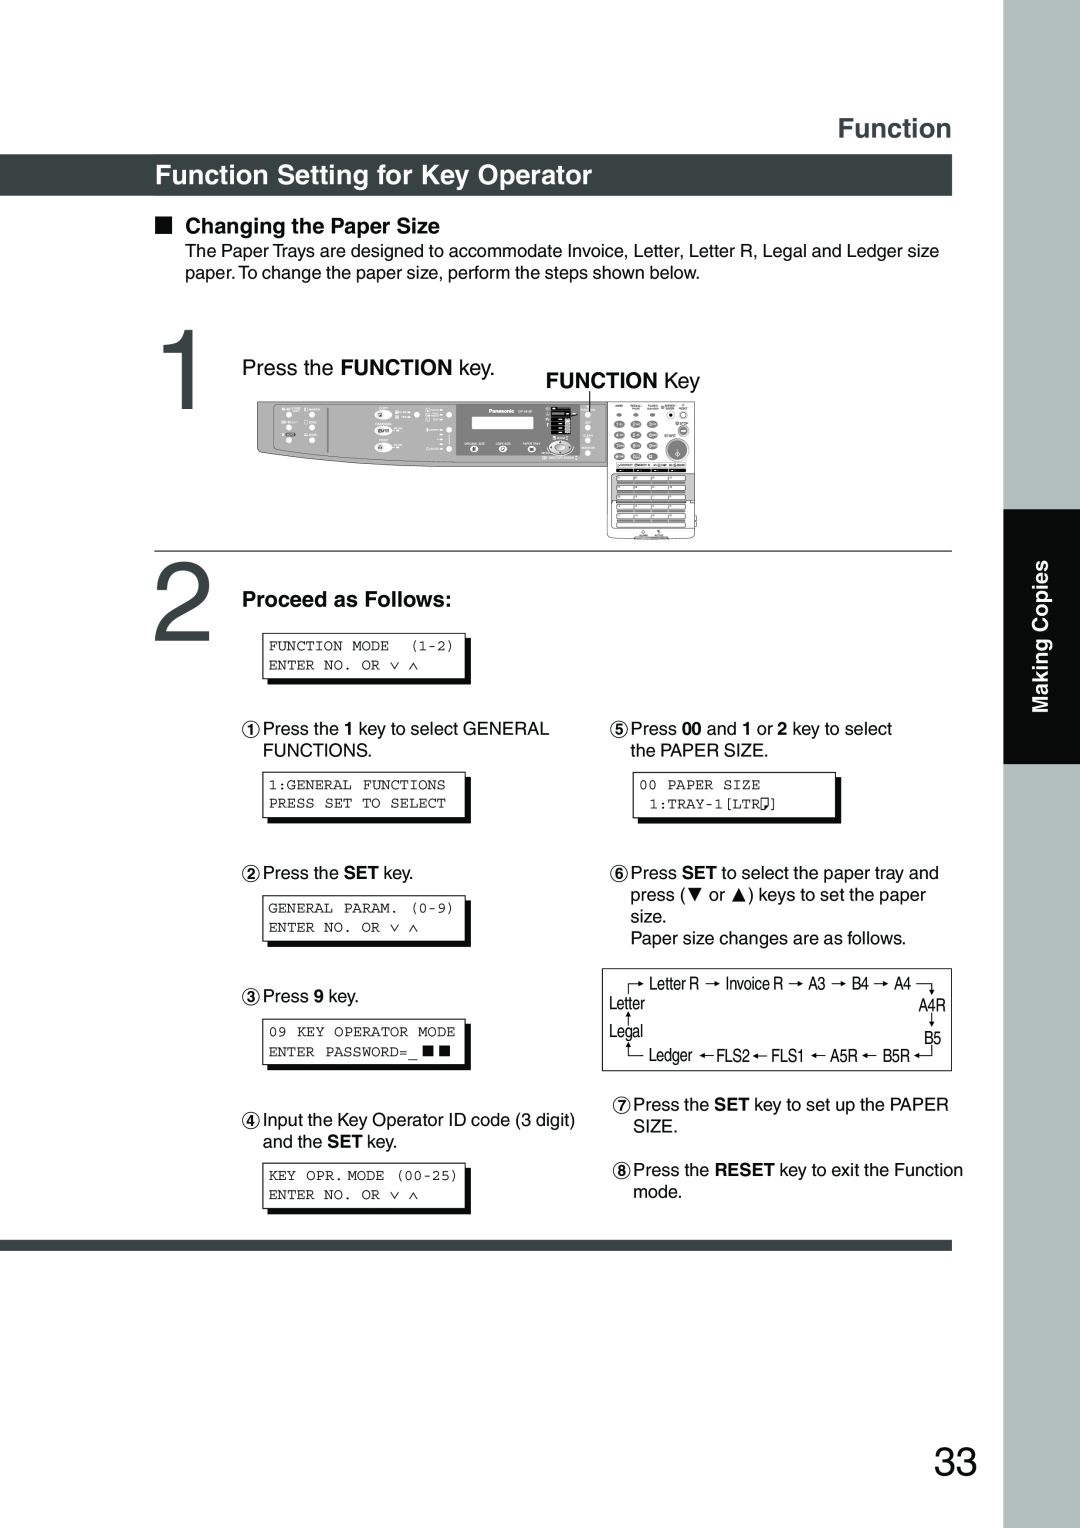 Panasonic DP-1810F manual Function Setting for Key Operator, Changing the Paper Size, Proceed as Follows, Making Copies 